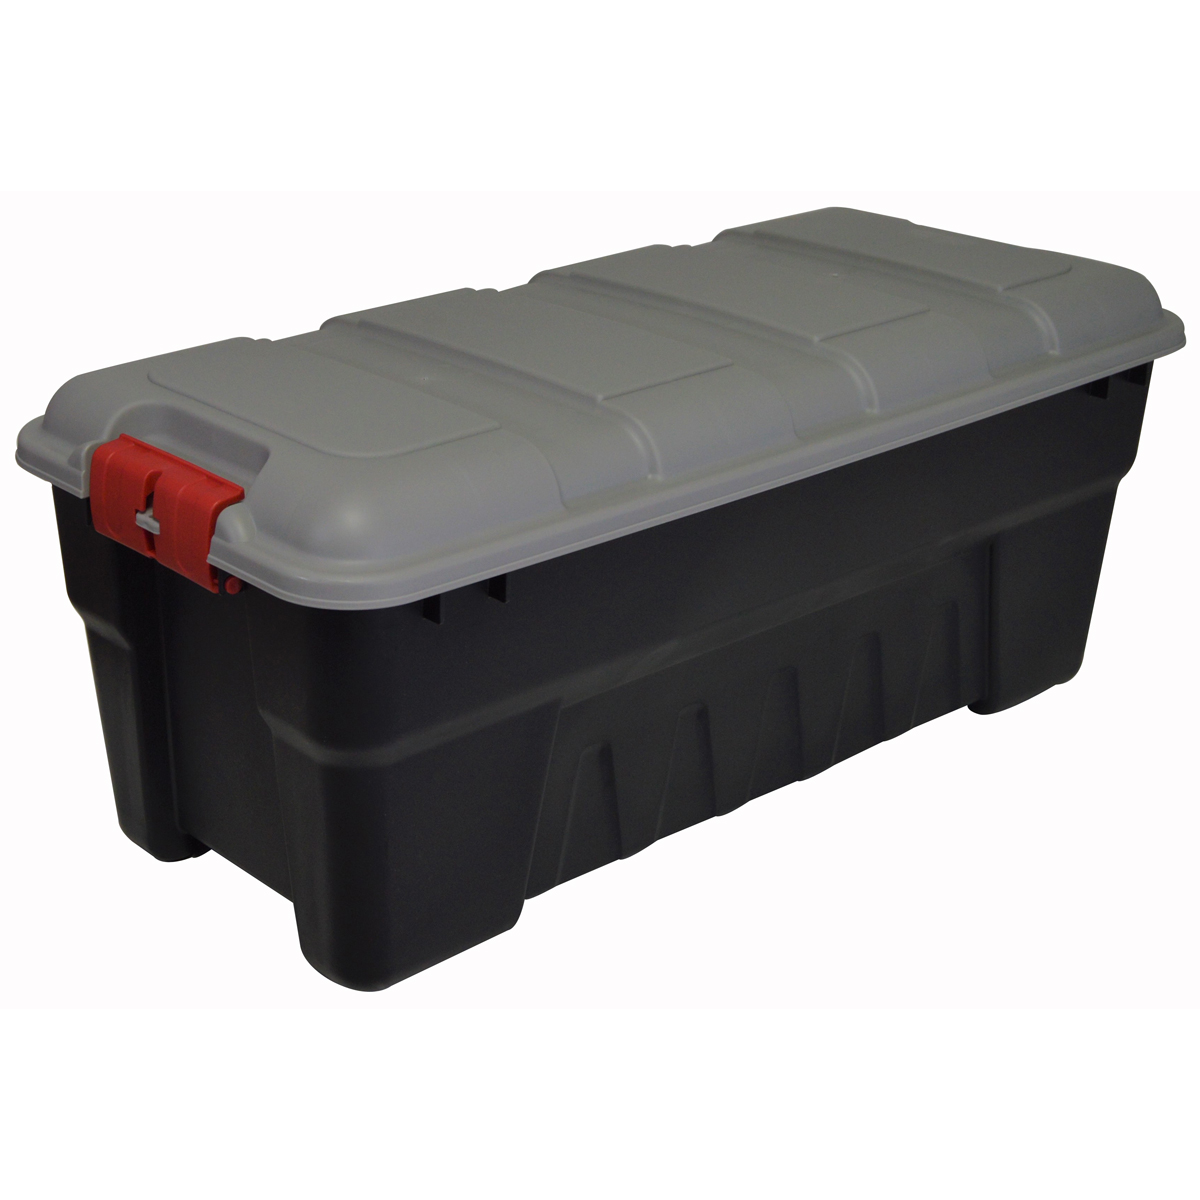 Rubbermaid 35 Gallon Action Packer Storage Bin, Heavy Duty Plastic,  Lockable, Black and Gray, Included Lid